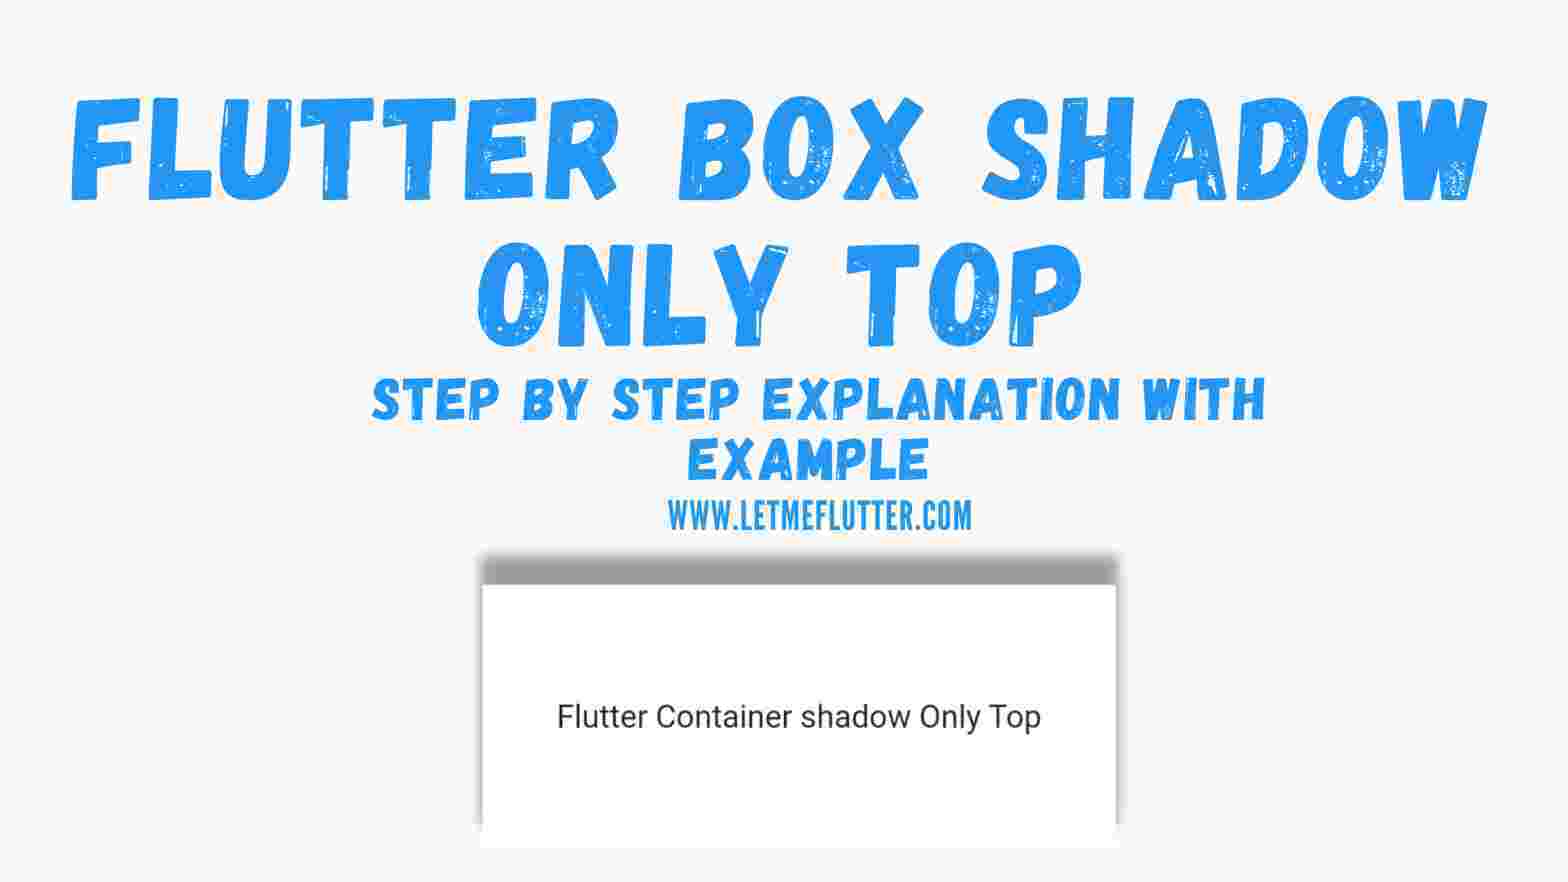 Flutter Box Shadow only top